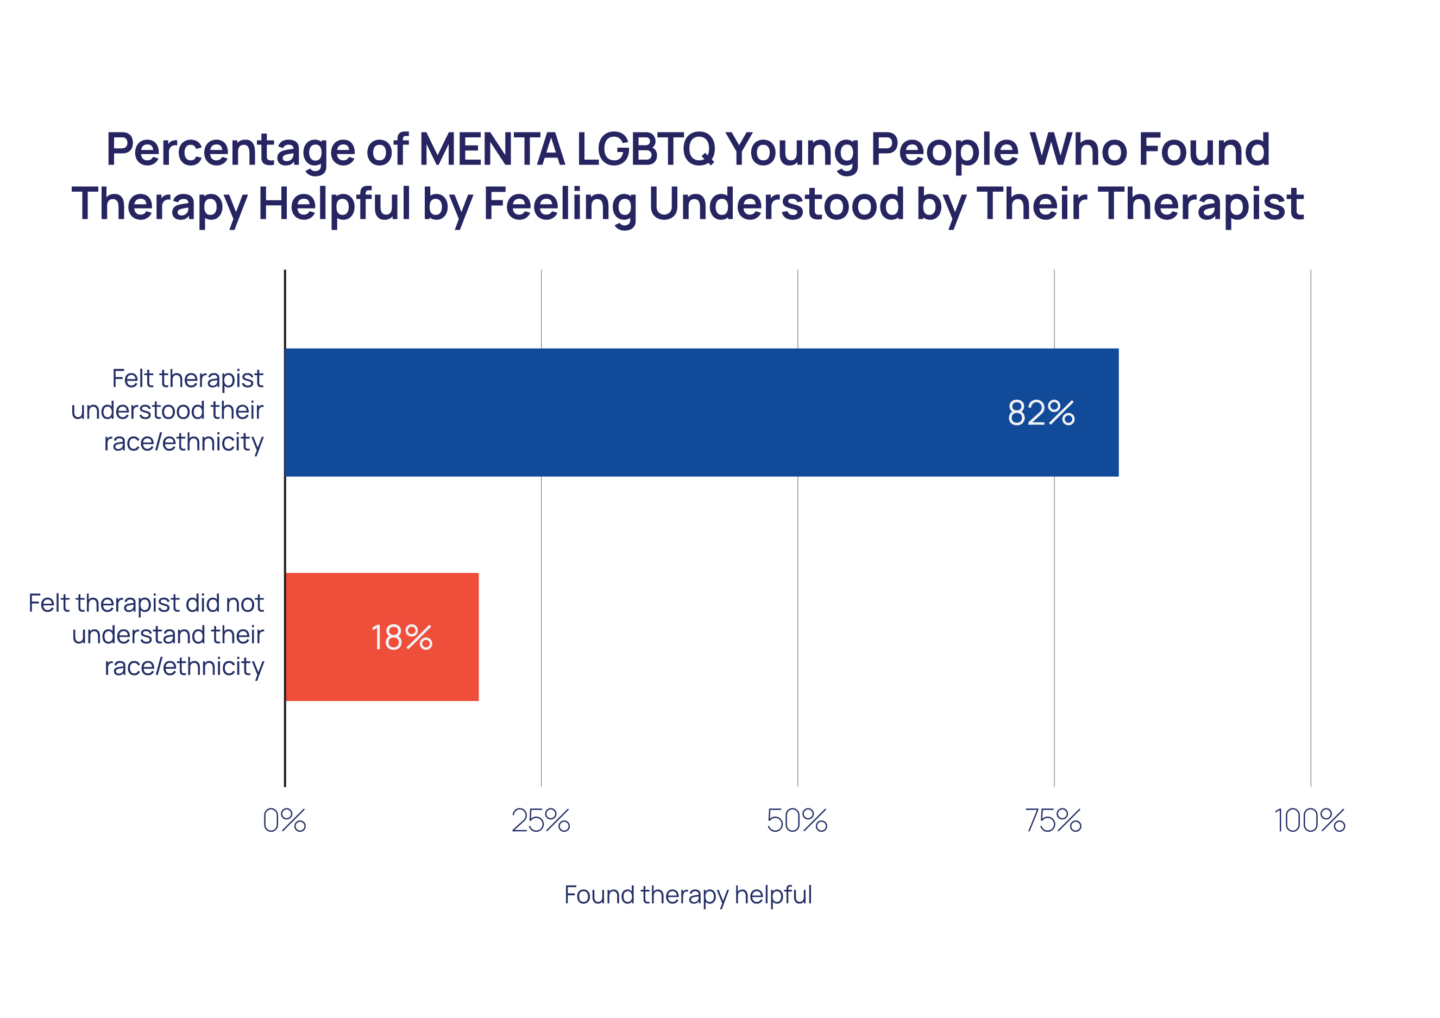 Percentage of MENTA LGBTQ Young People Who Found Therapy Helpful by Feeling Understood by their Therapist bar chart